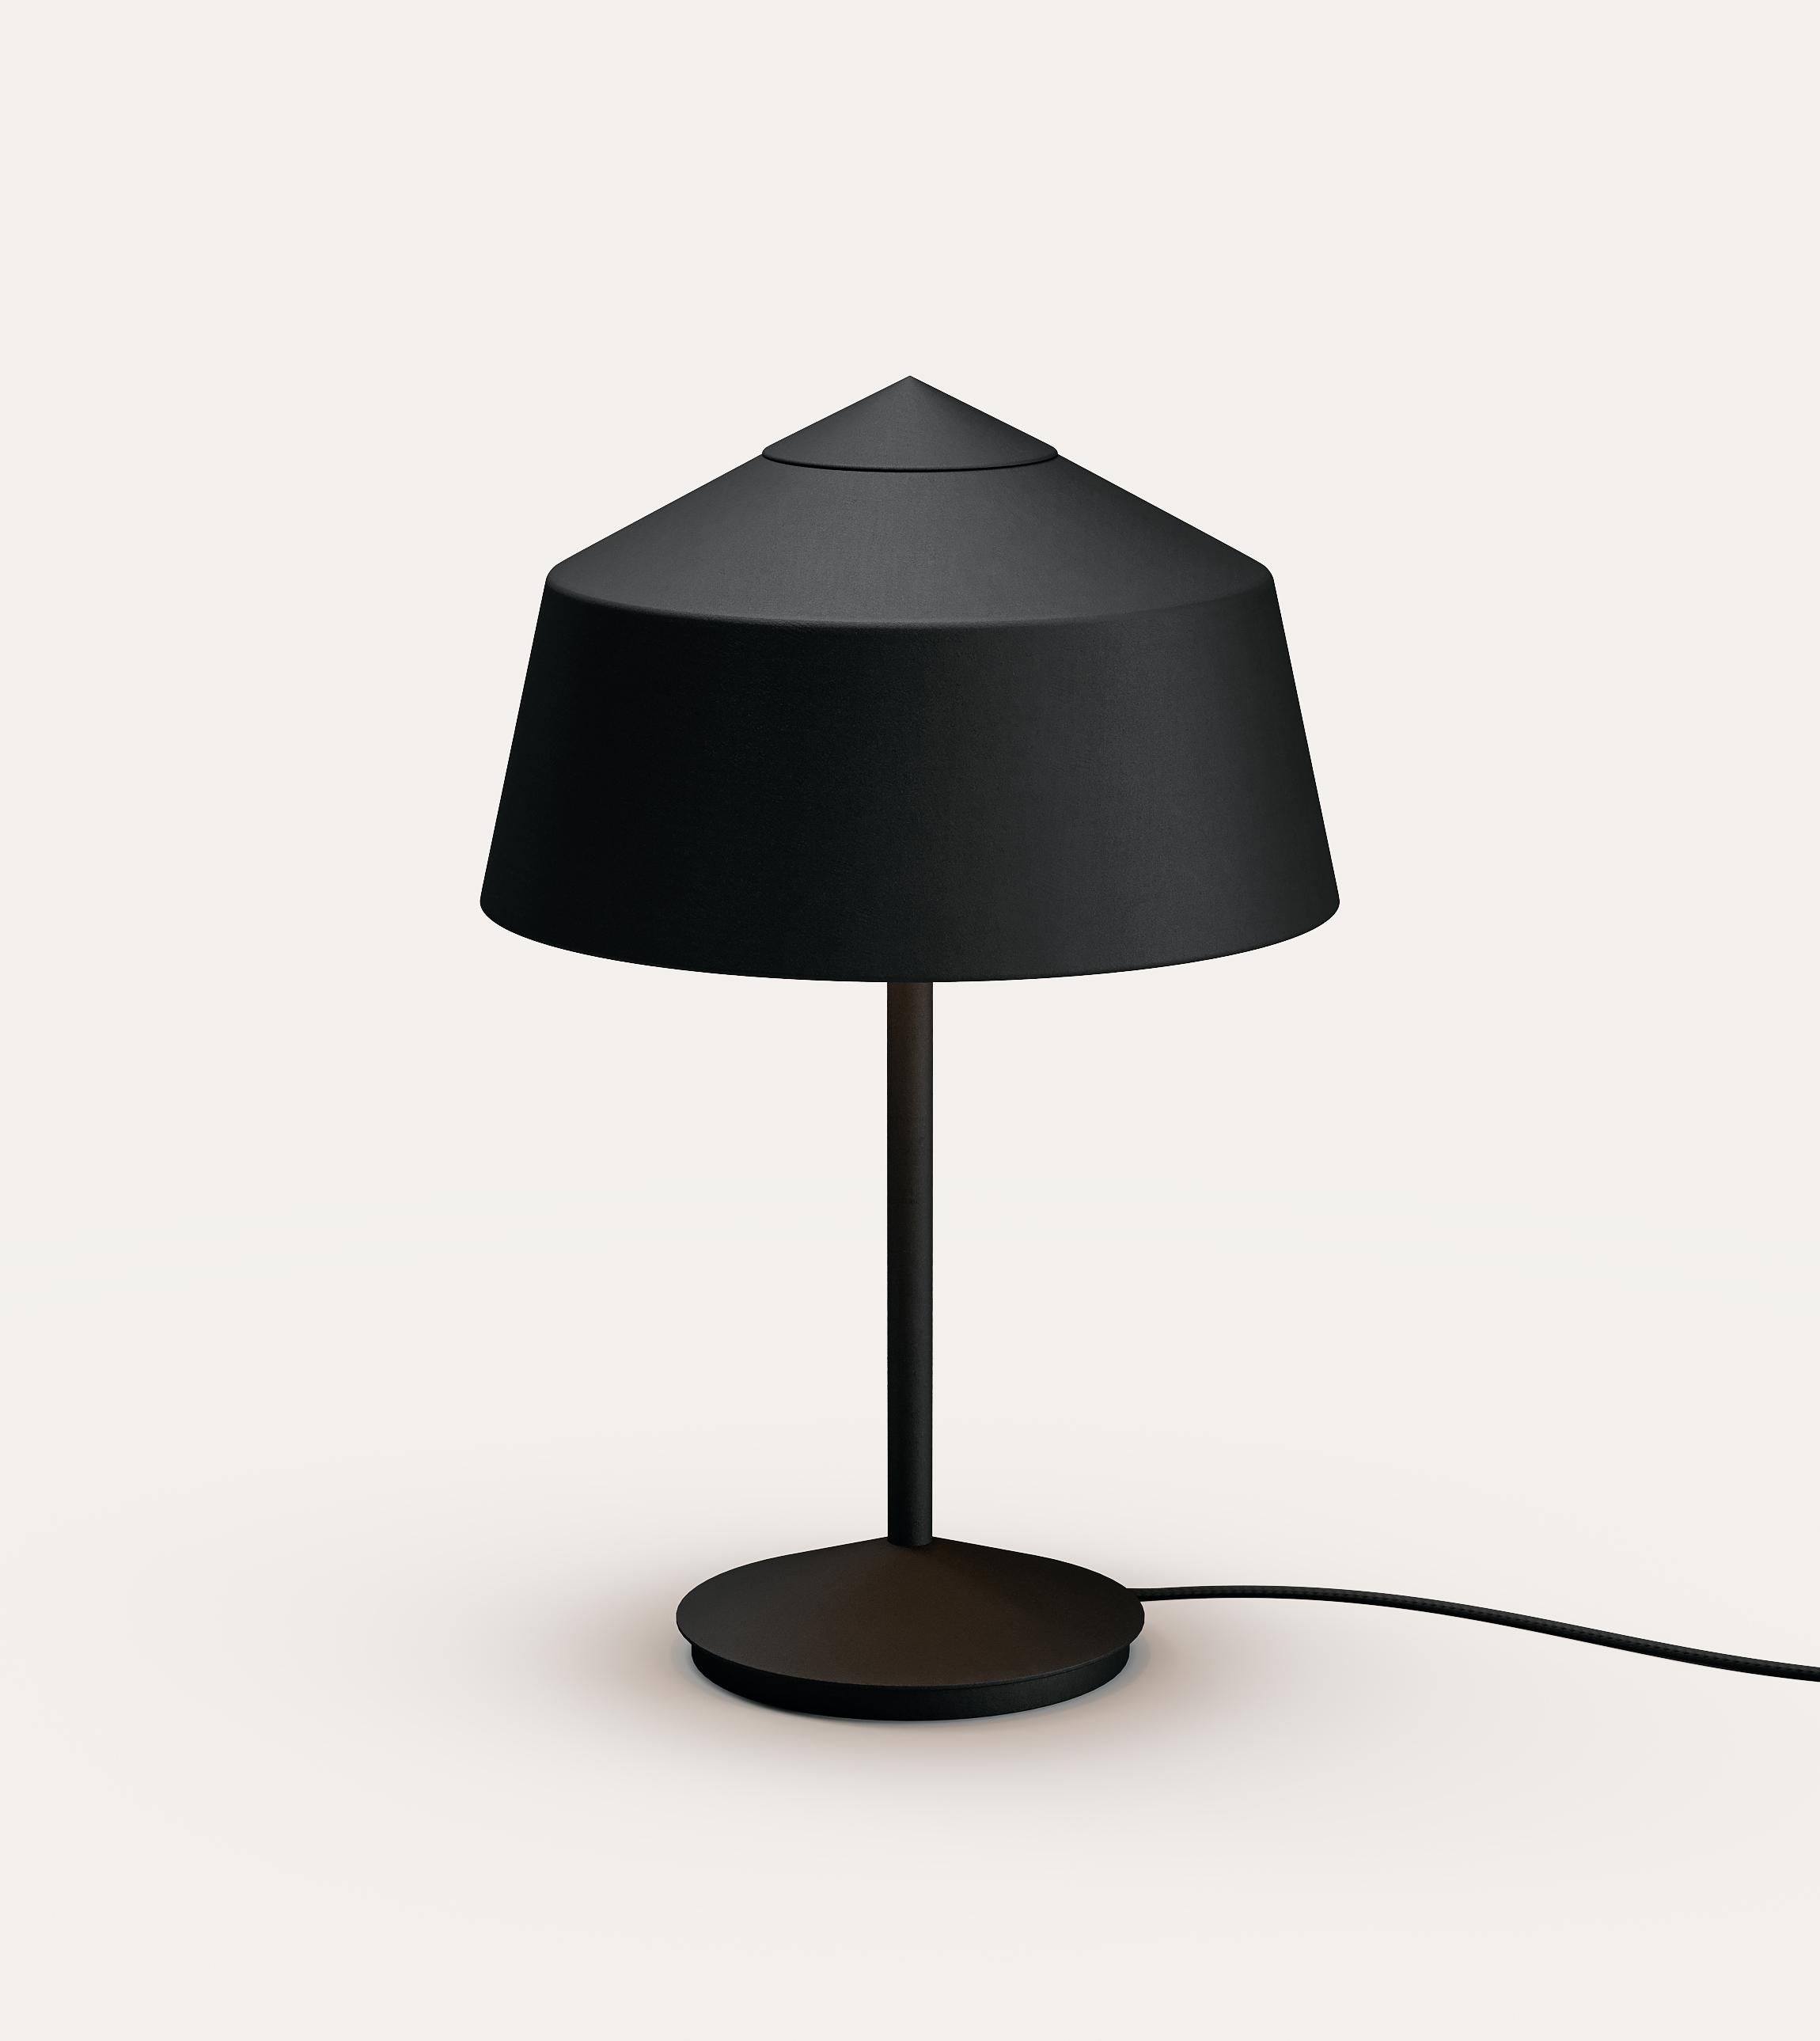 Modern Circus Table Lamp Designed by Corinna Warm for Warm In Black/Bronze  For Sale